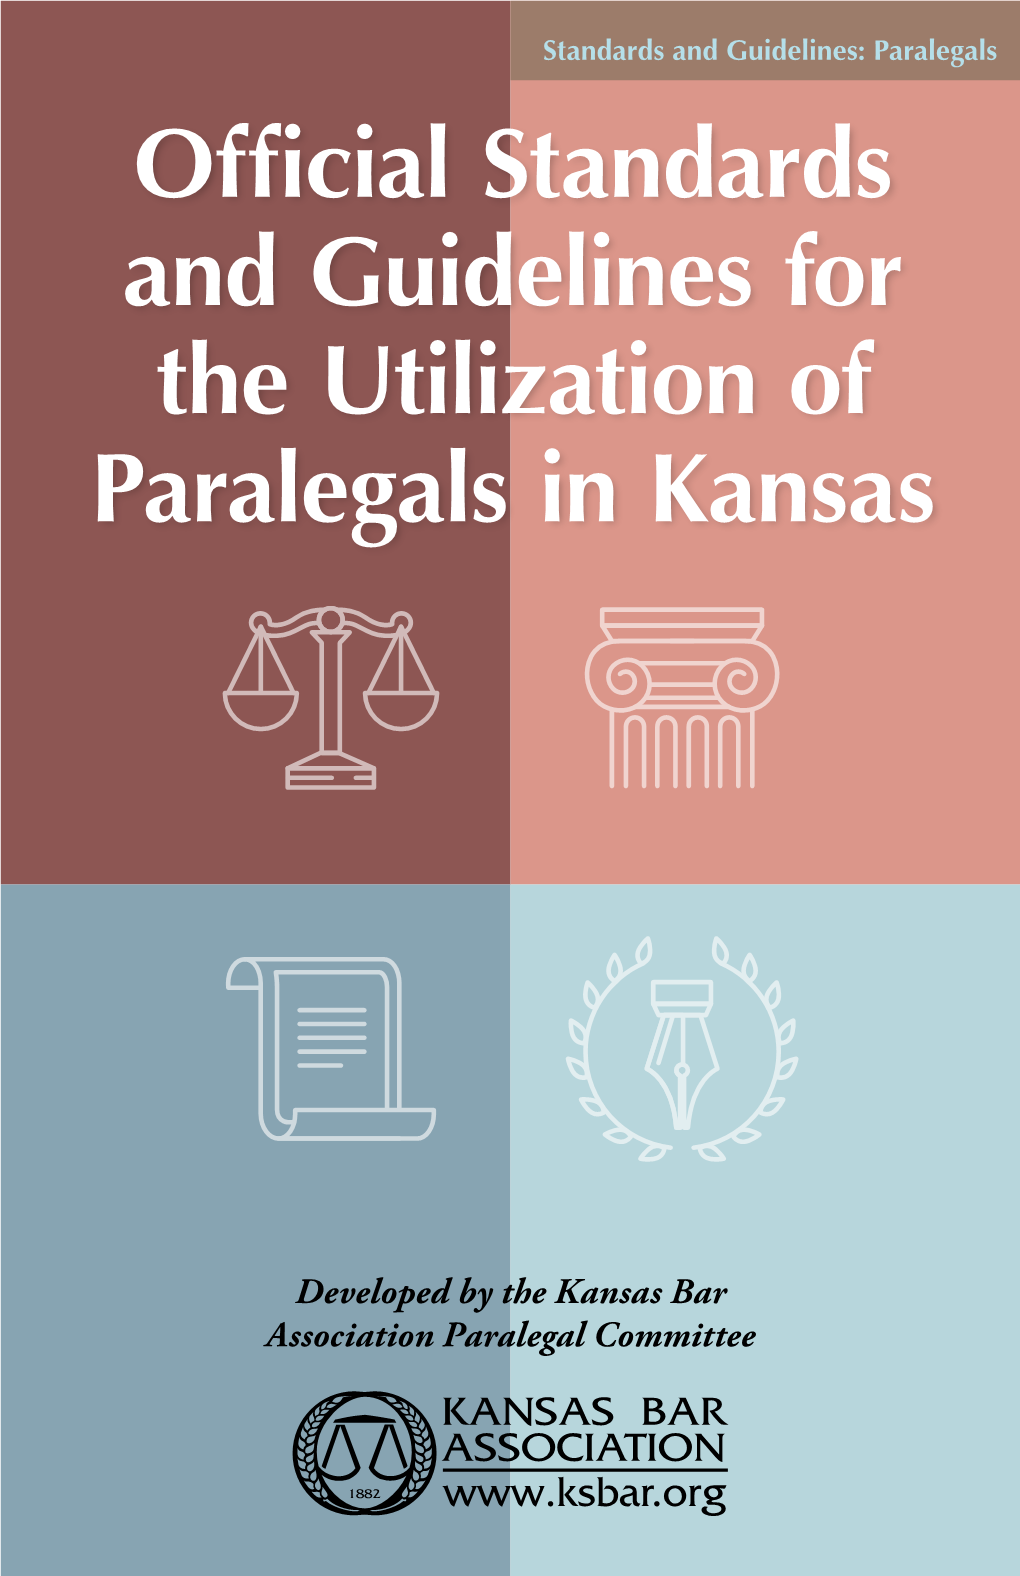 Official Standards and Guidelines for the Utilization of Paralegals in Kansas